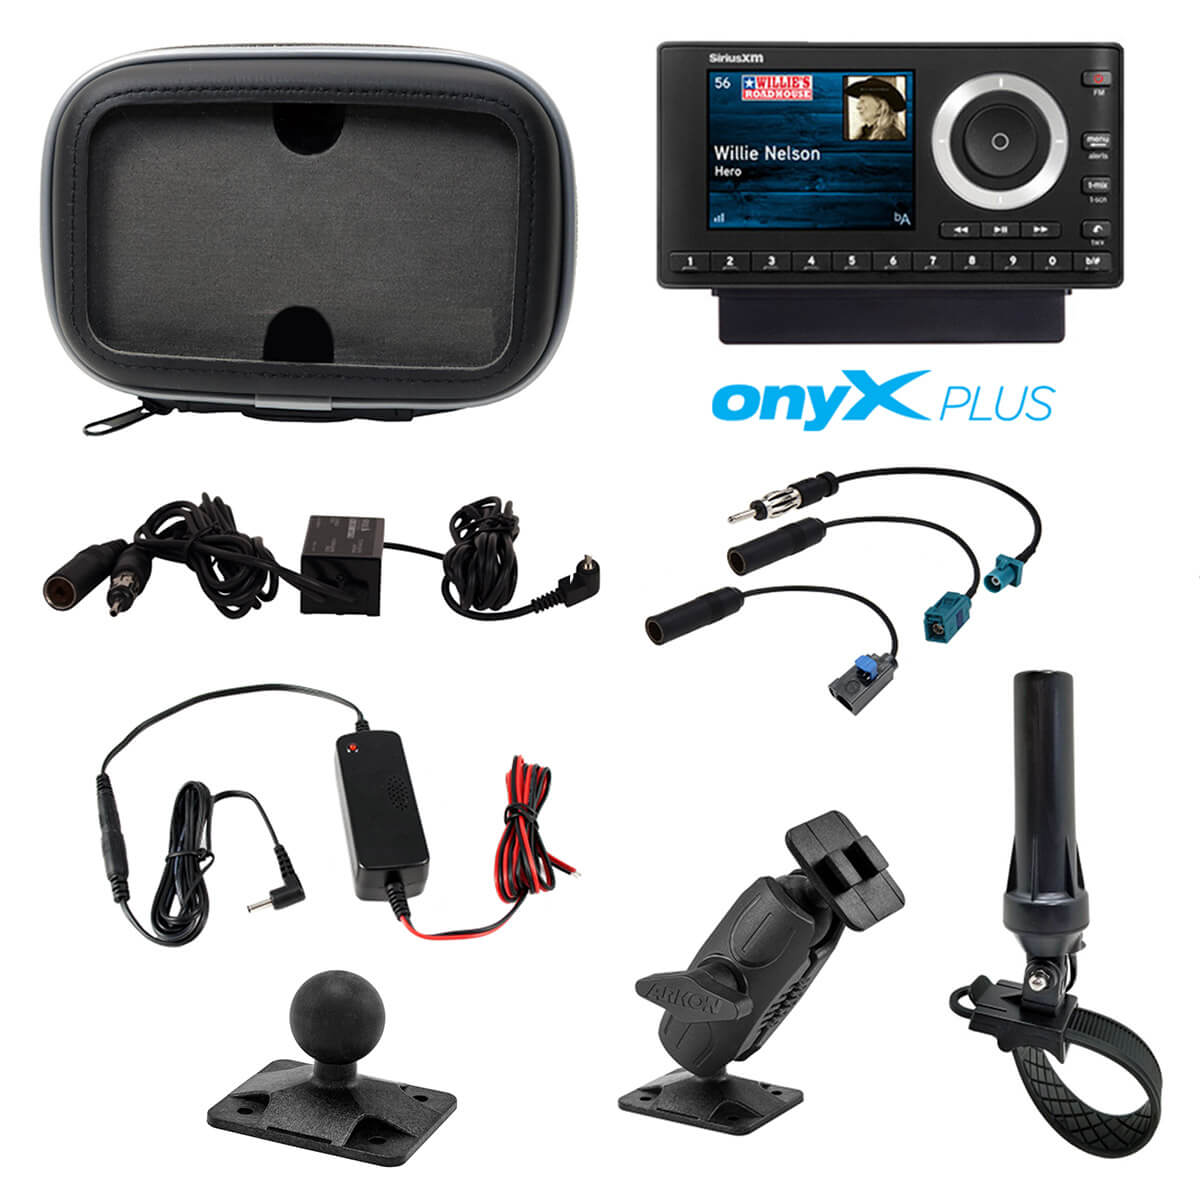 SiriusXM UTV Bluetooth Installation Kit with Onyx Plus Receiver. Perfect for Polaris RZR and other UTV Off-road vehicles.